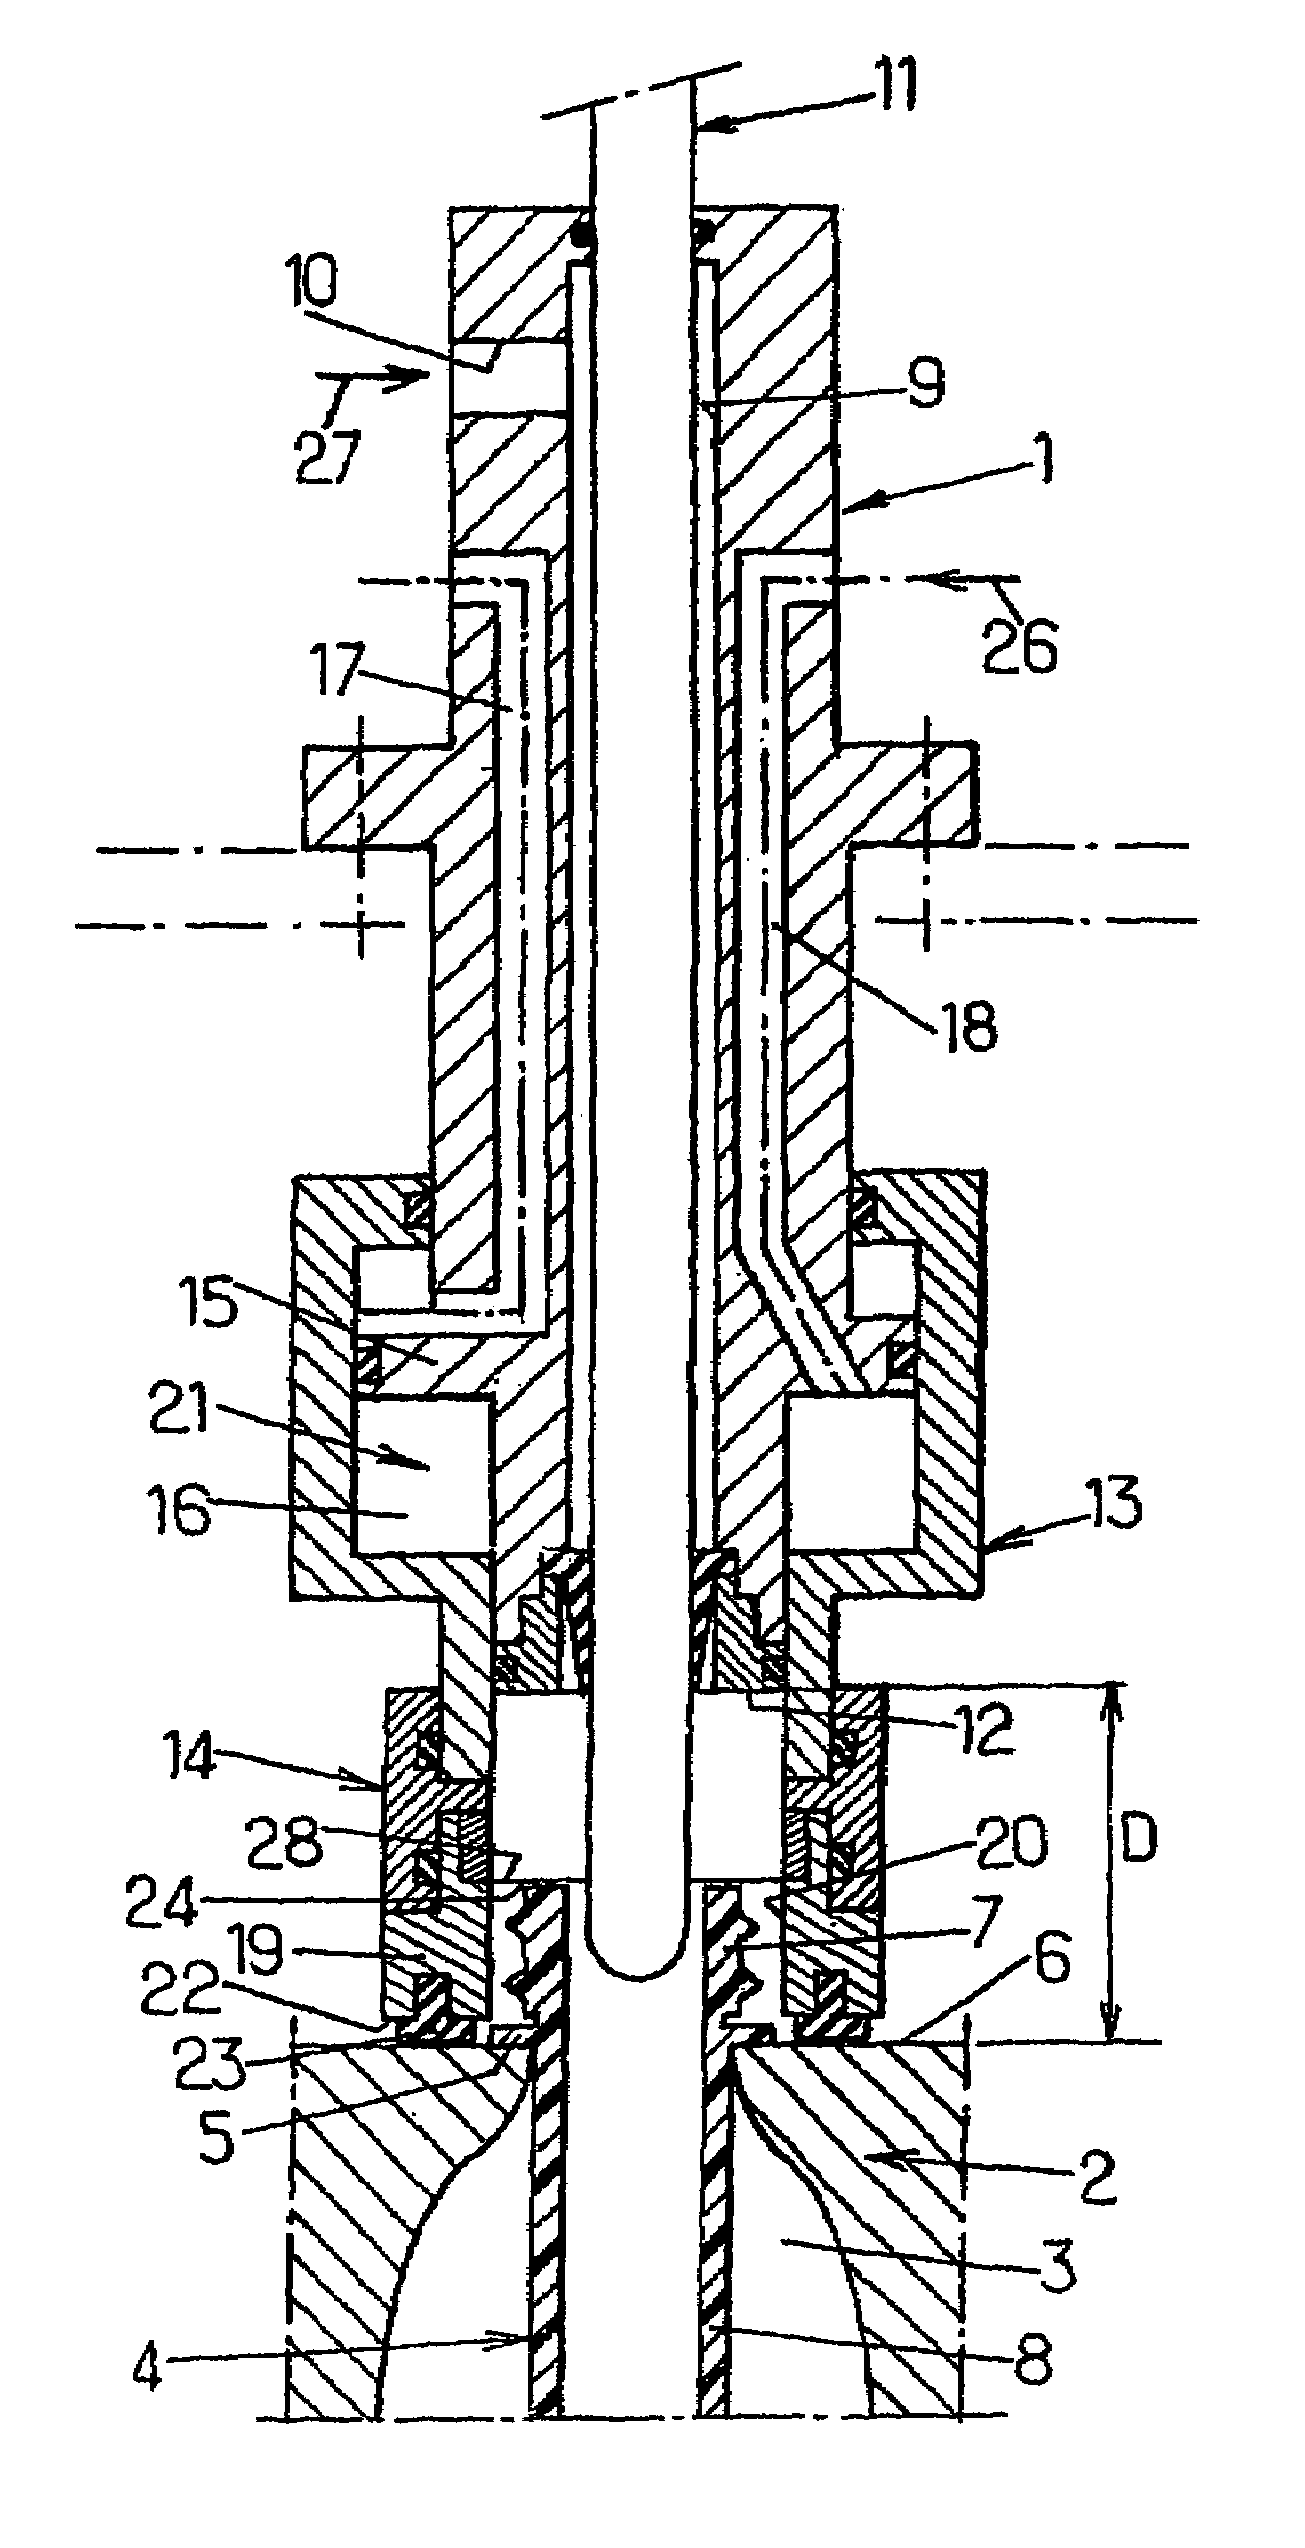 Blow molding system for the manufacture of thermoplastic receptacles